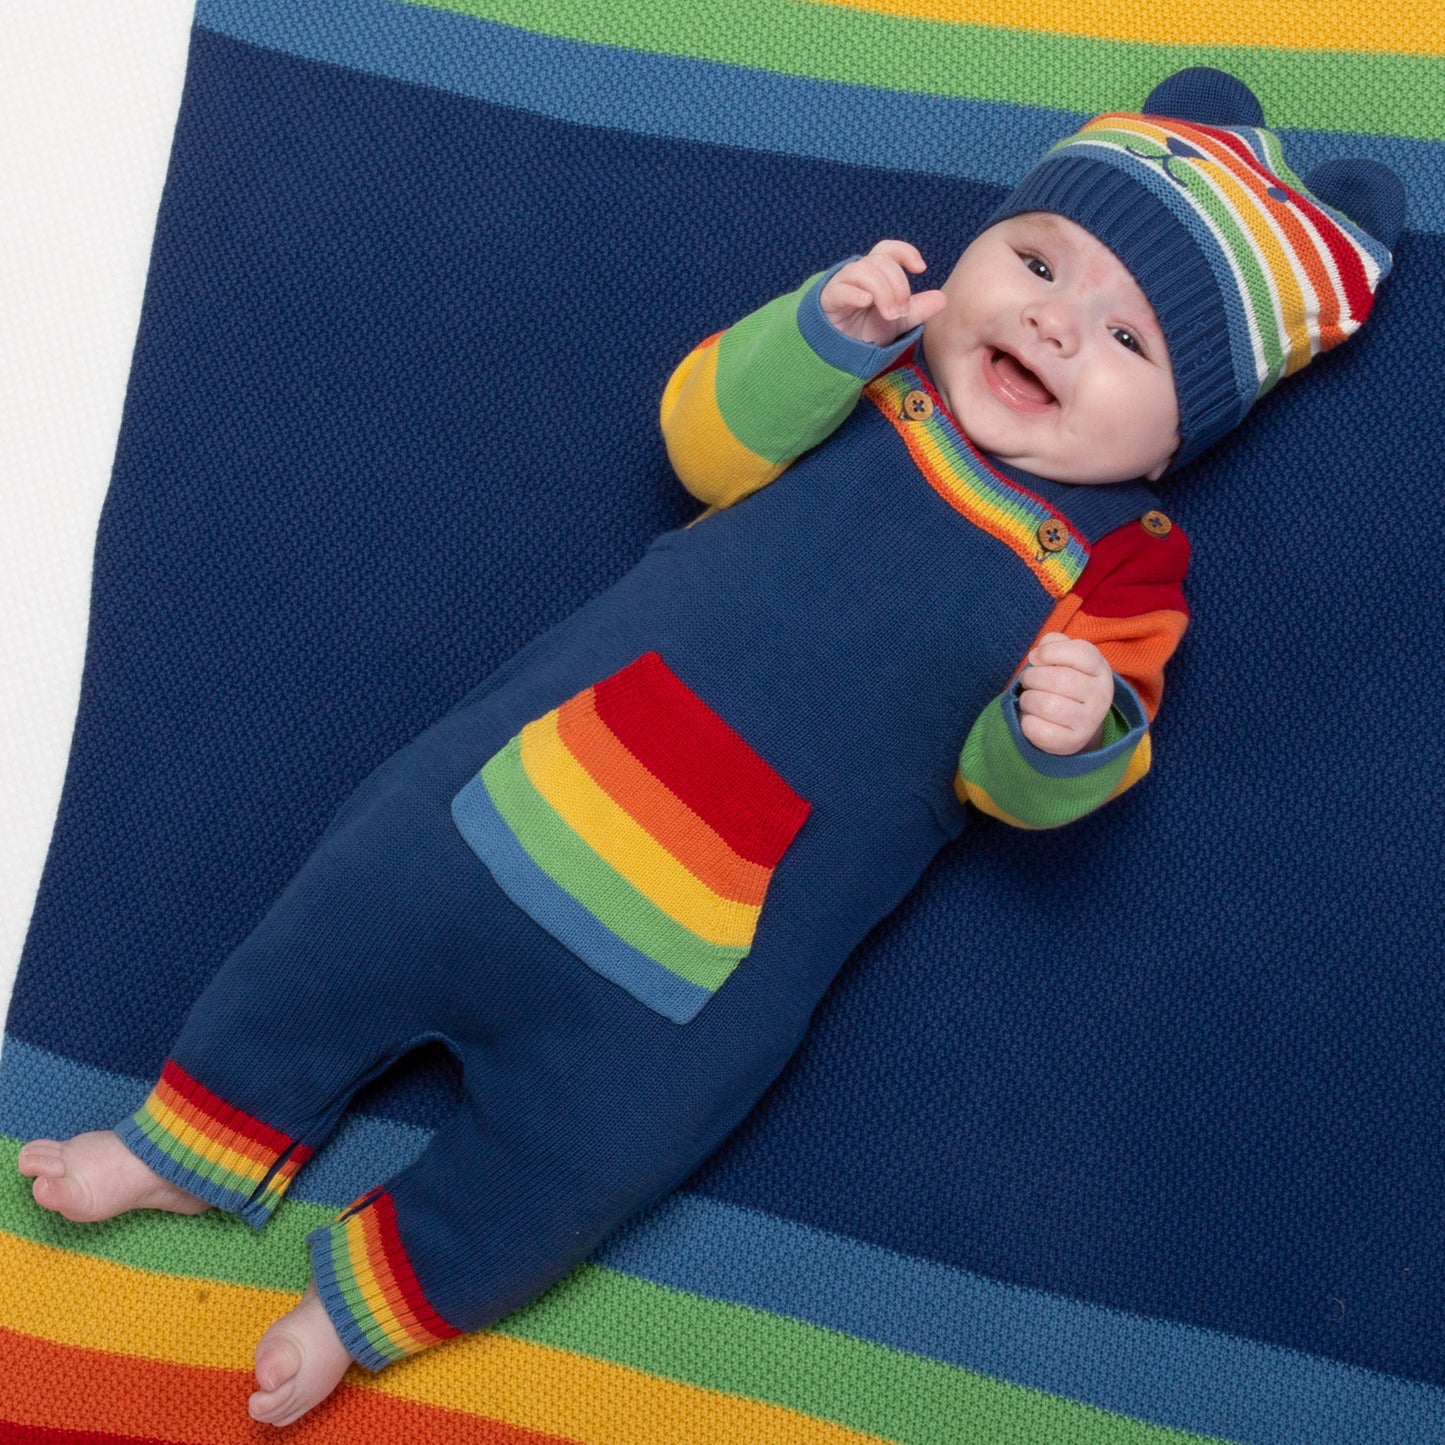 Baby wearing rainbow knit dungarees